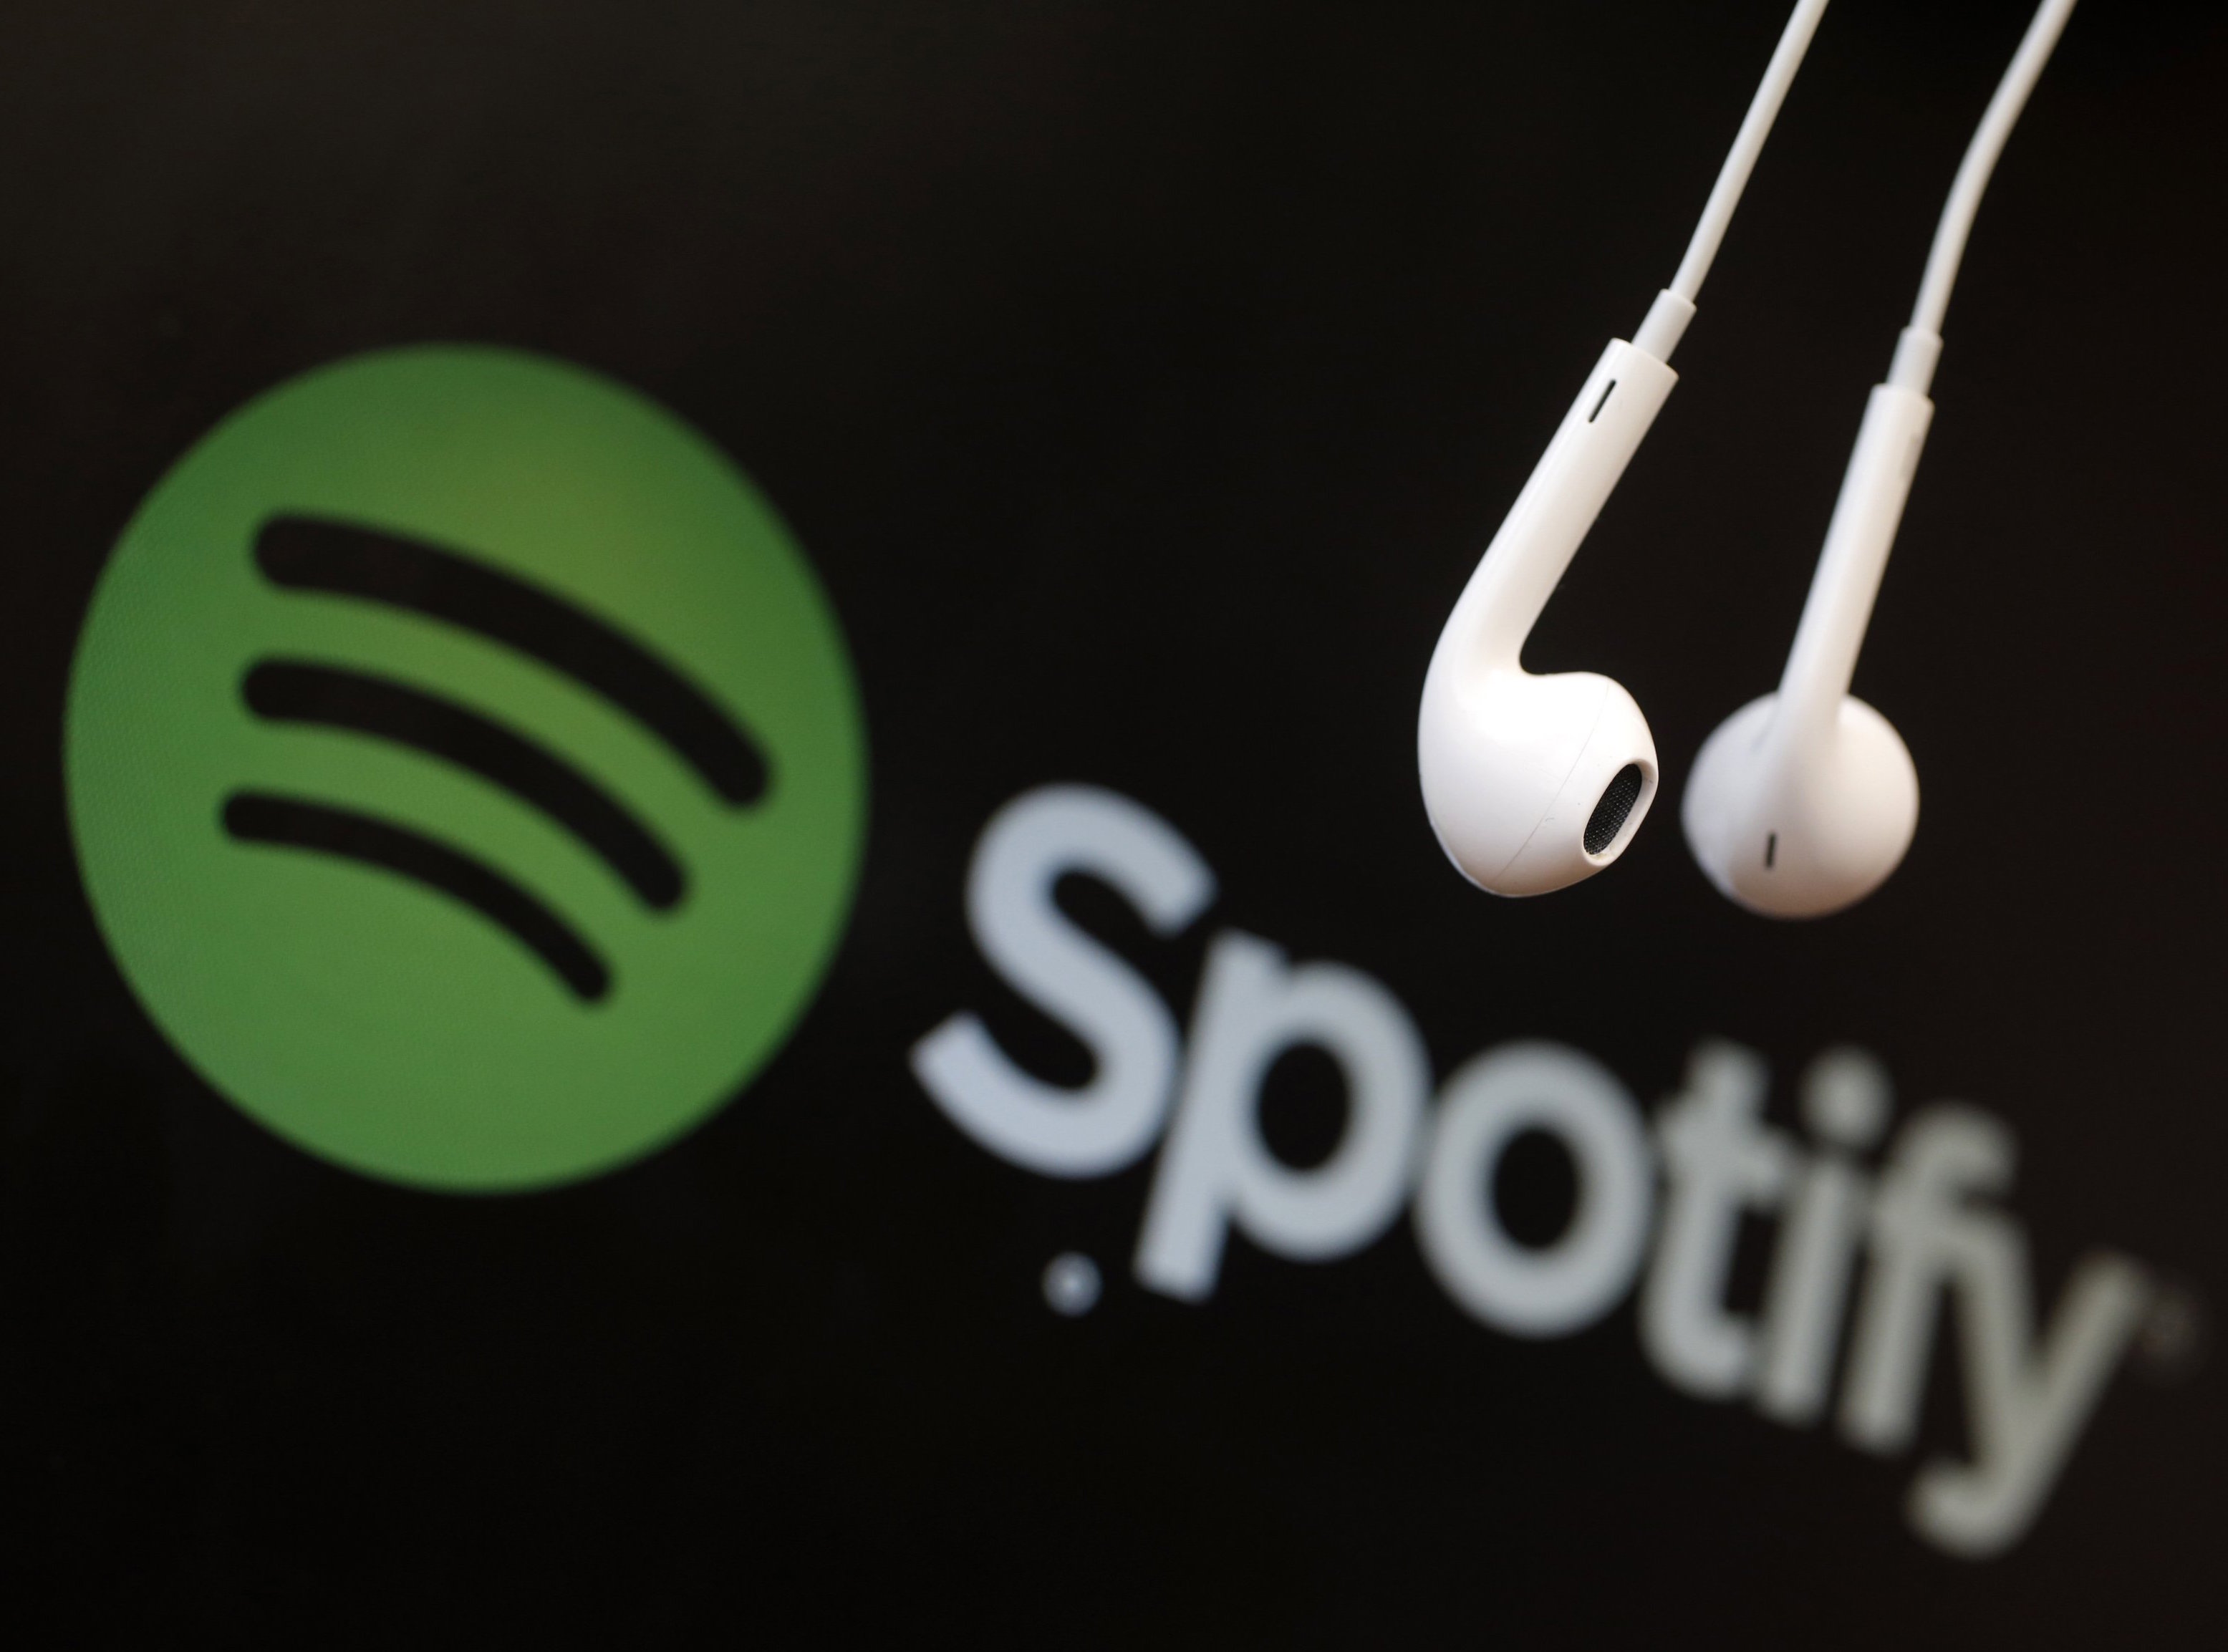 Why does Wall Street have issues with Spotify?